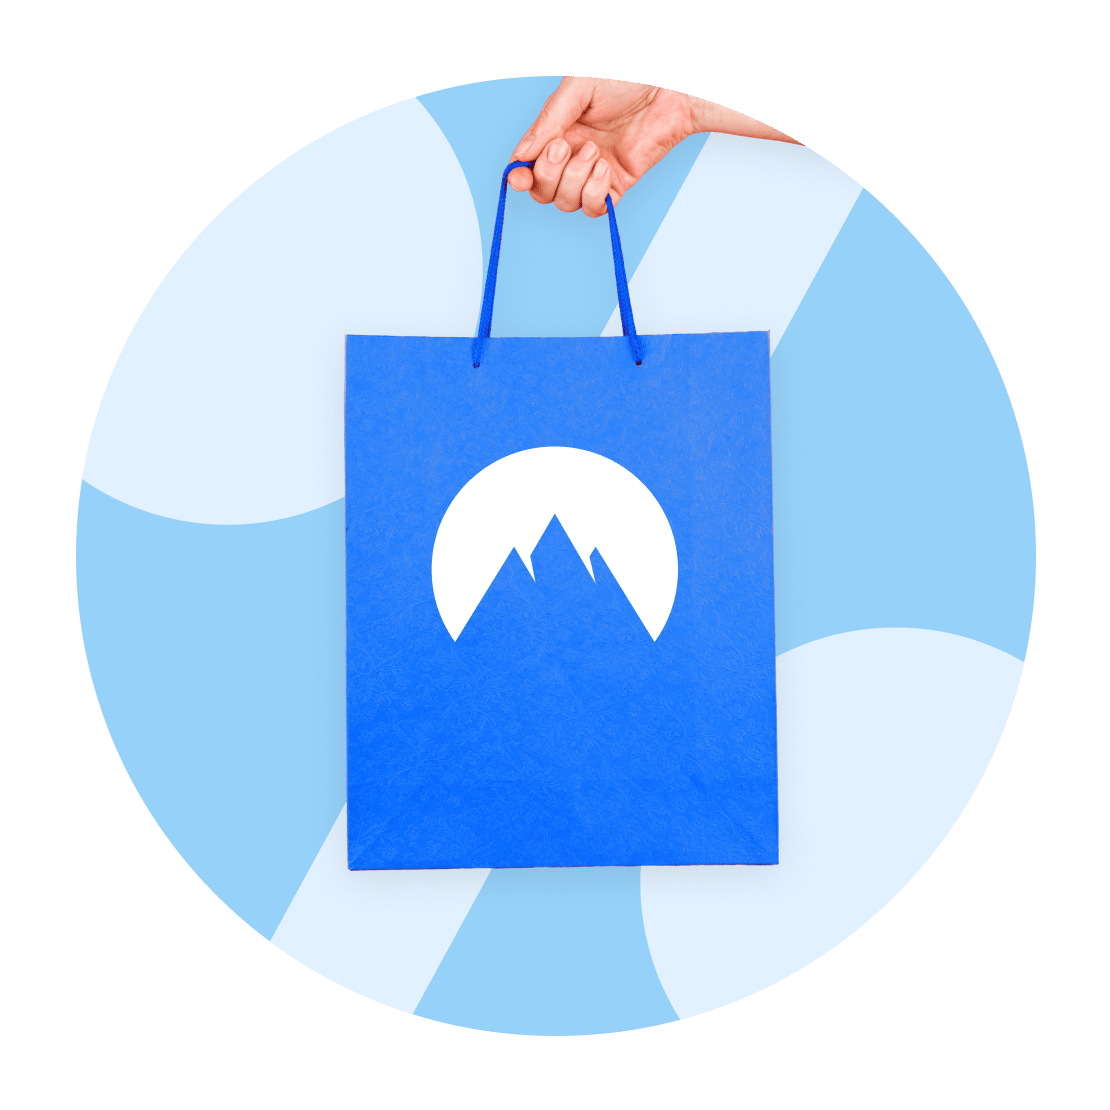 A hand holding a gift bag with the NordVPN logo.